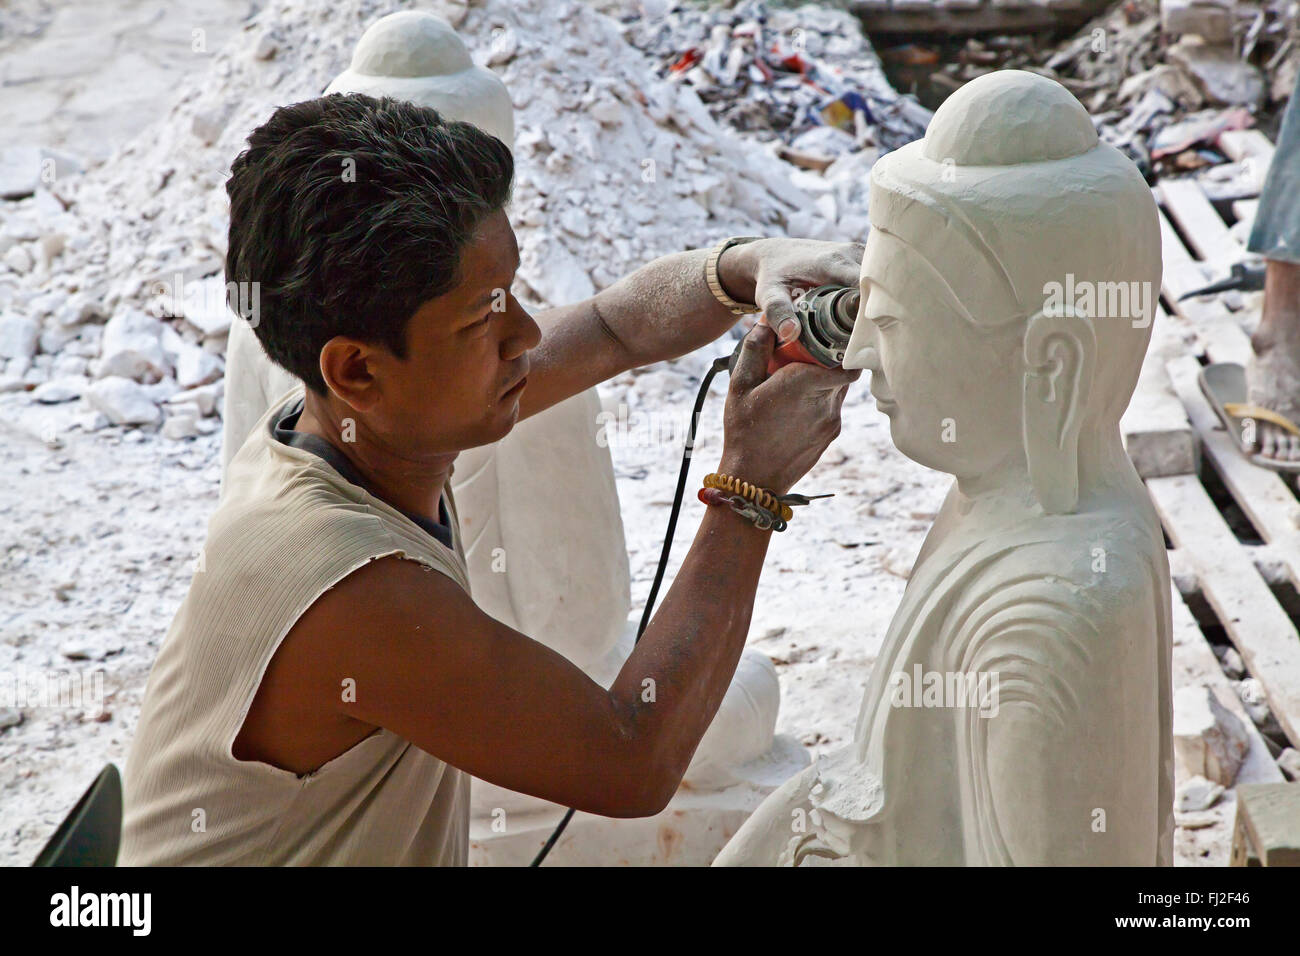 The carving of BUDDHA images is a living art in MANDALAY - MYANMAR Stock Photo